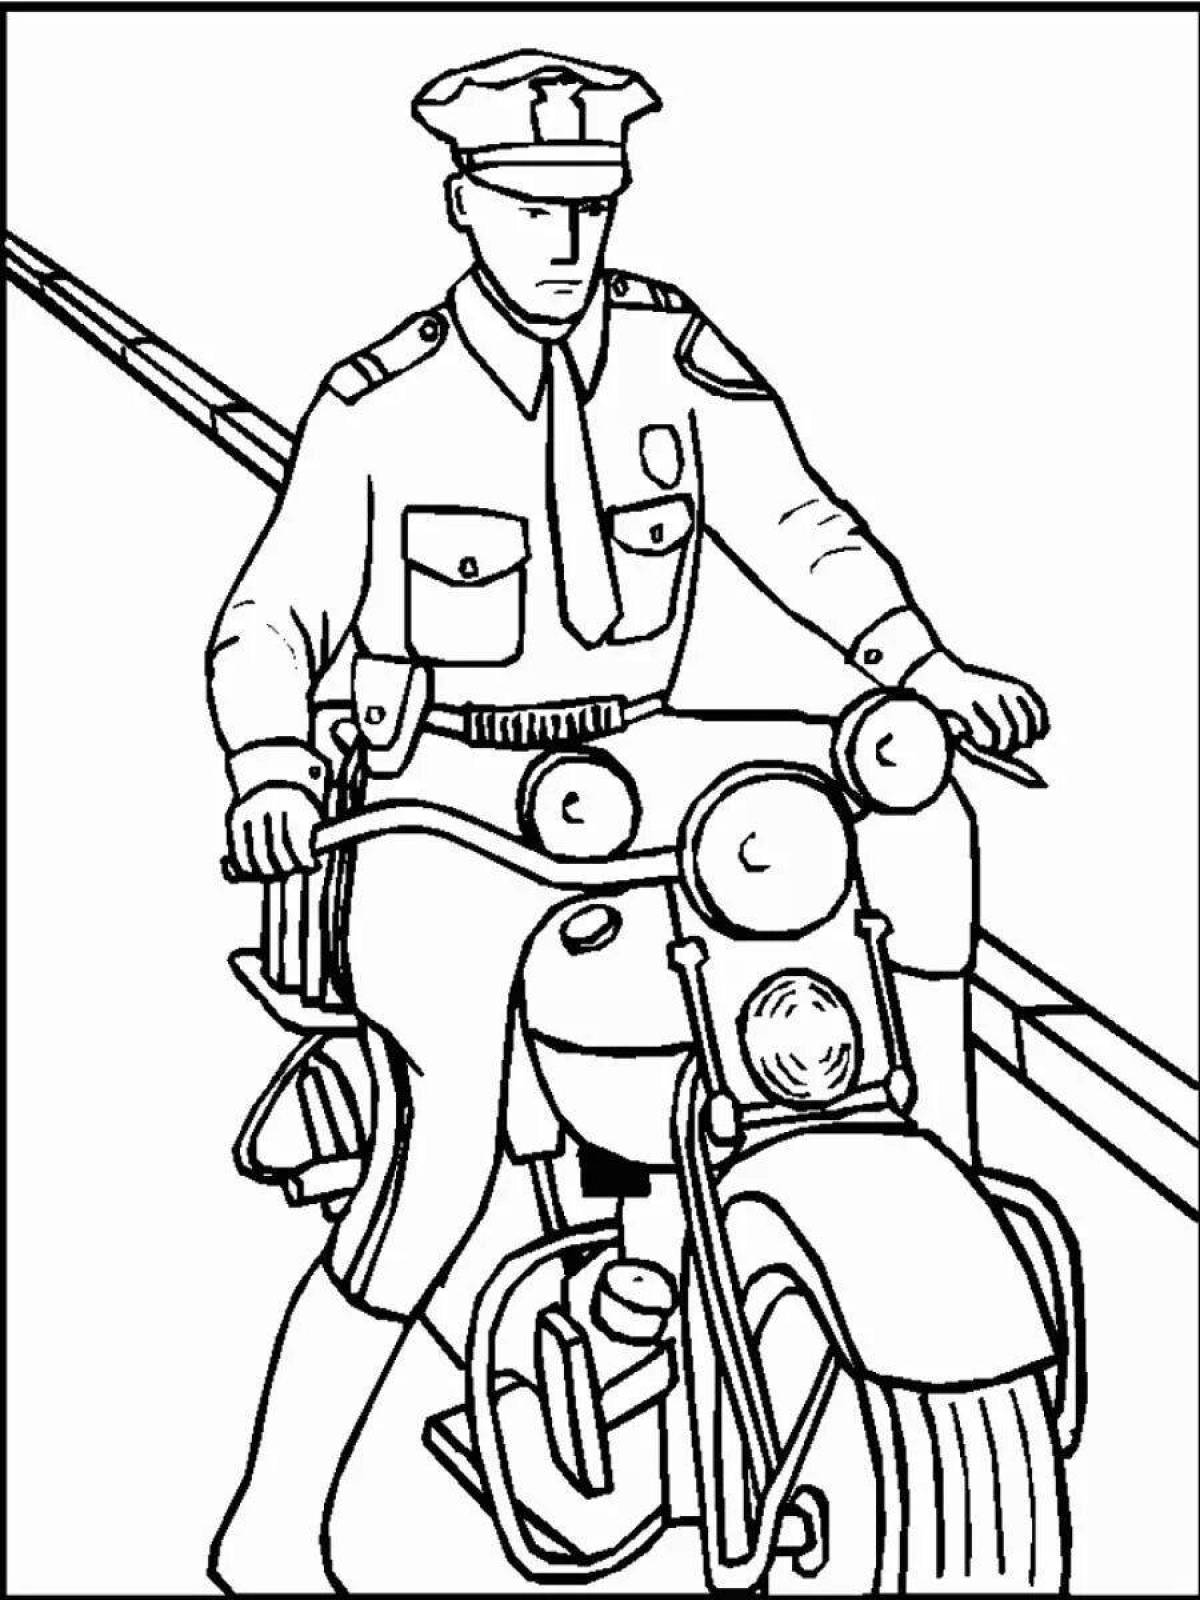 Coloring book great police profession